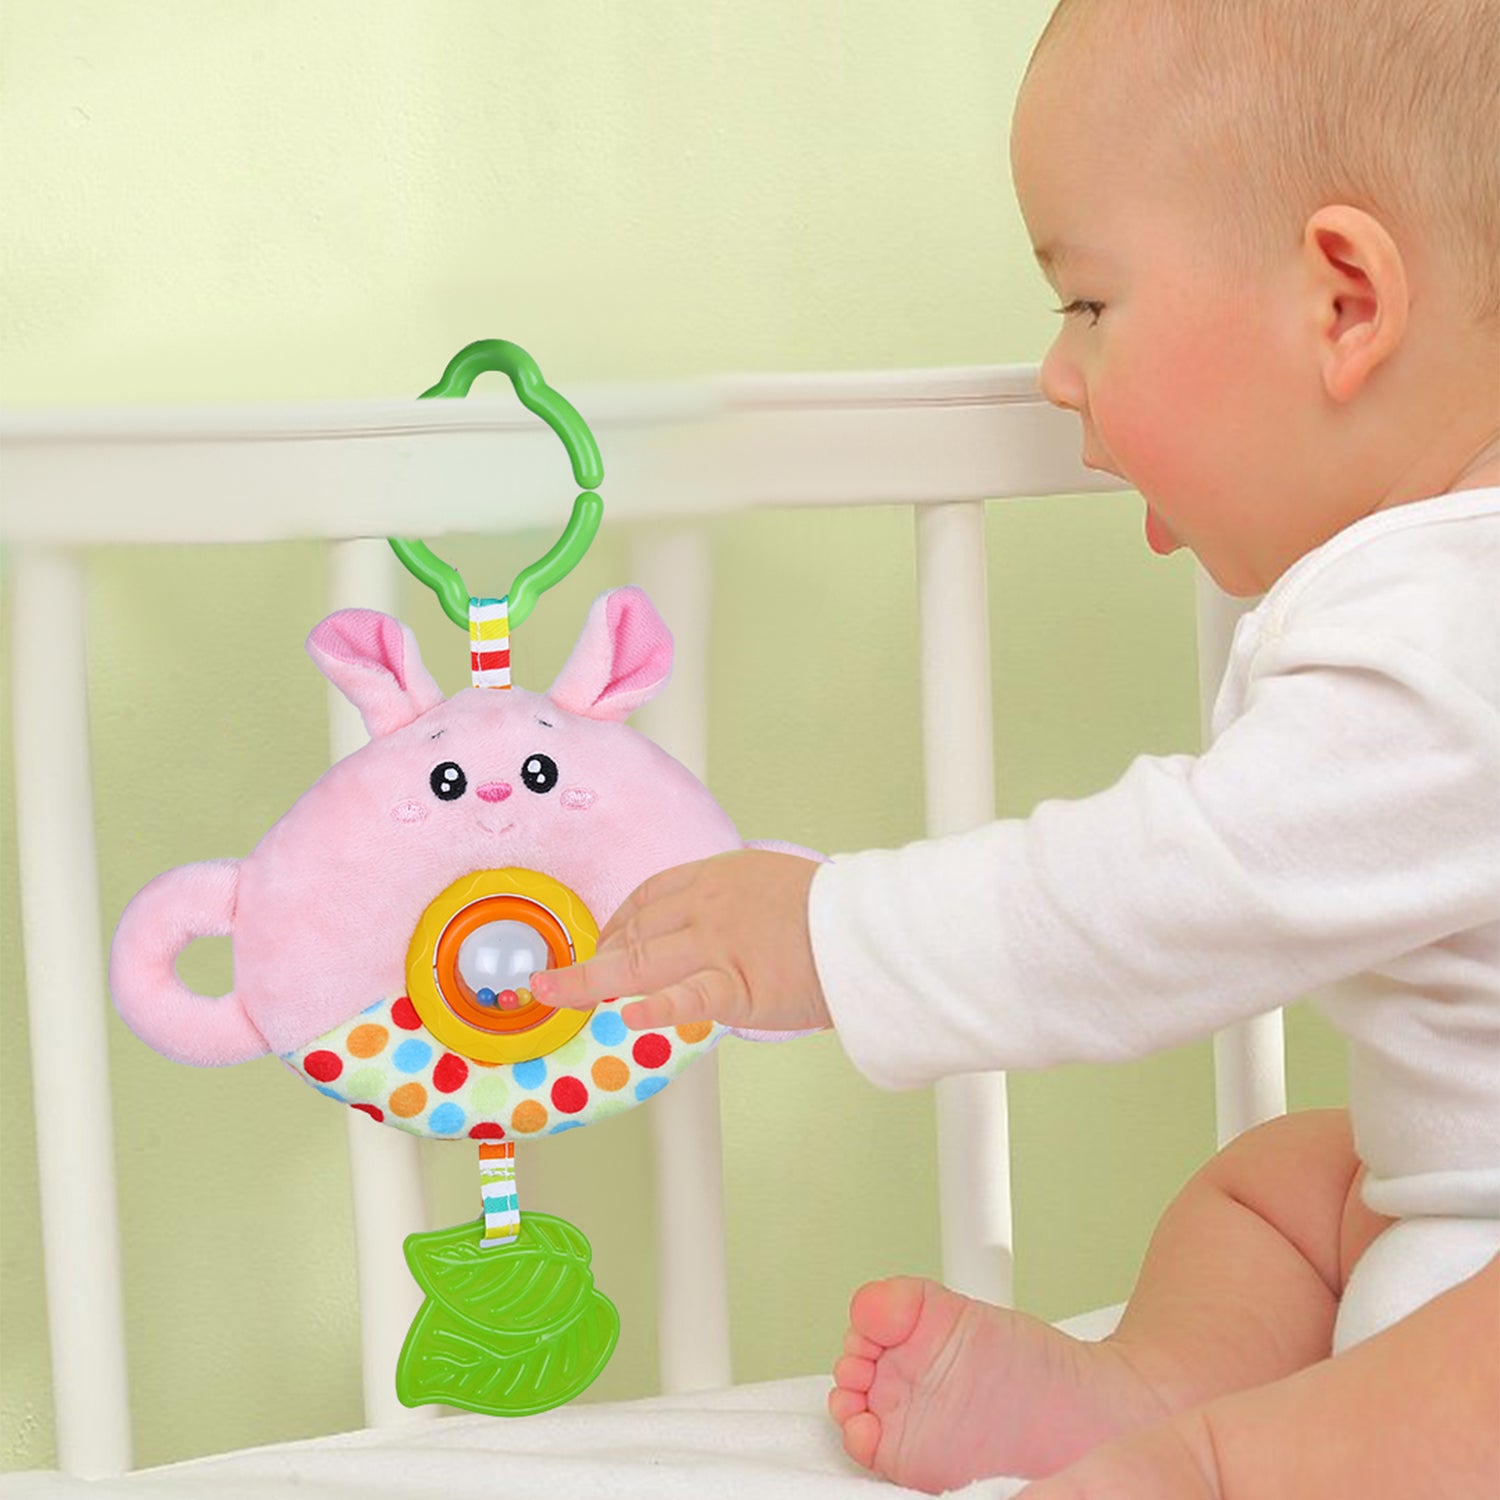 Bunny Stroller Crib Hanging Plush Rattle Toy With Teether - Pink - Baby Moo